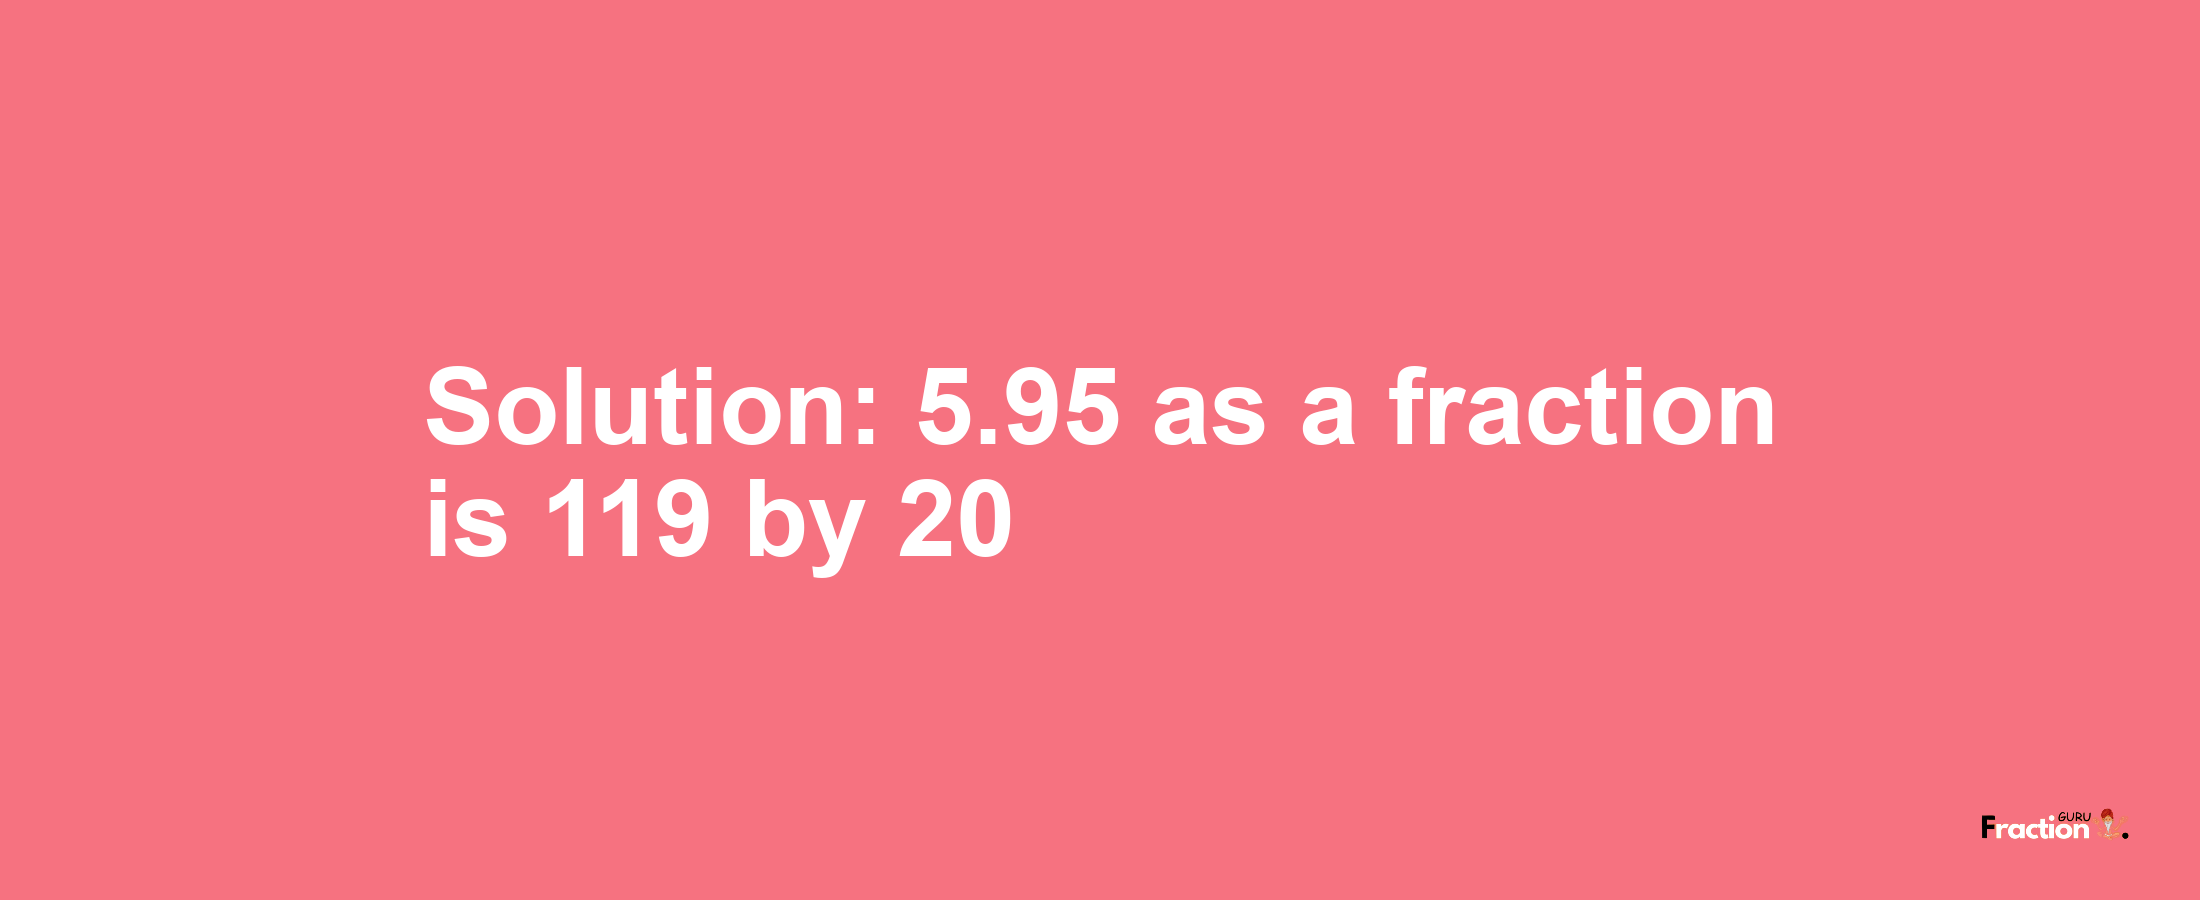 Solution:5.95 as a fraction is 119/20